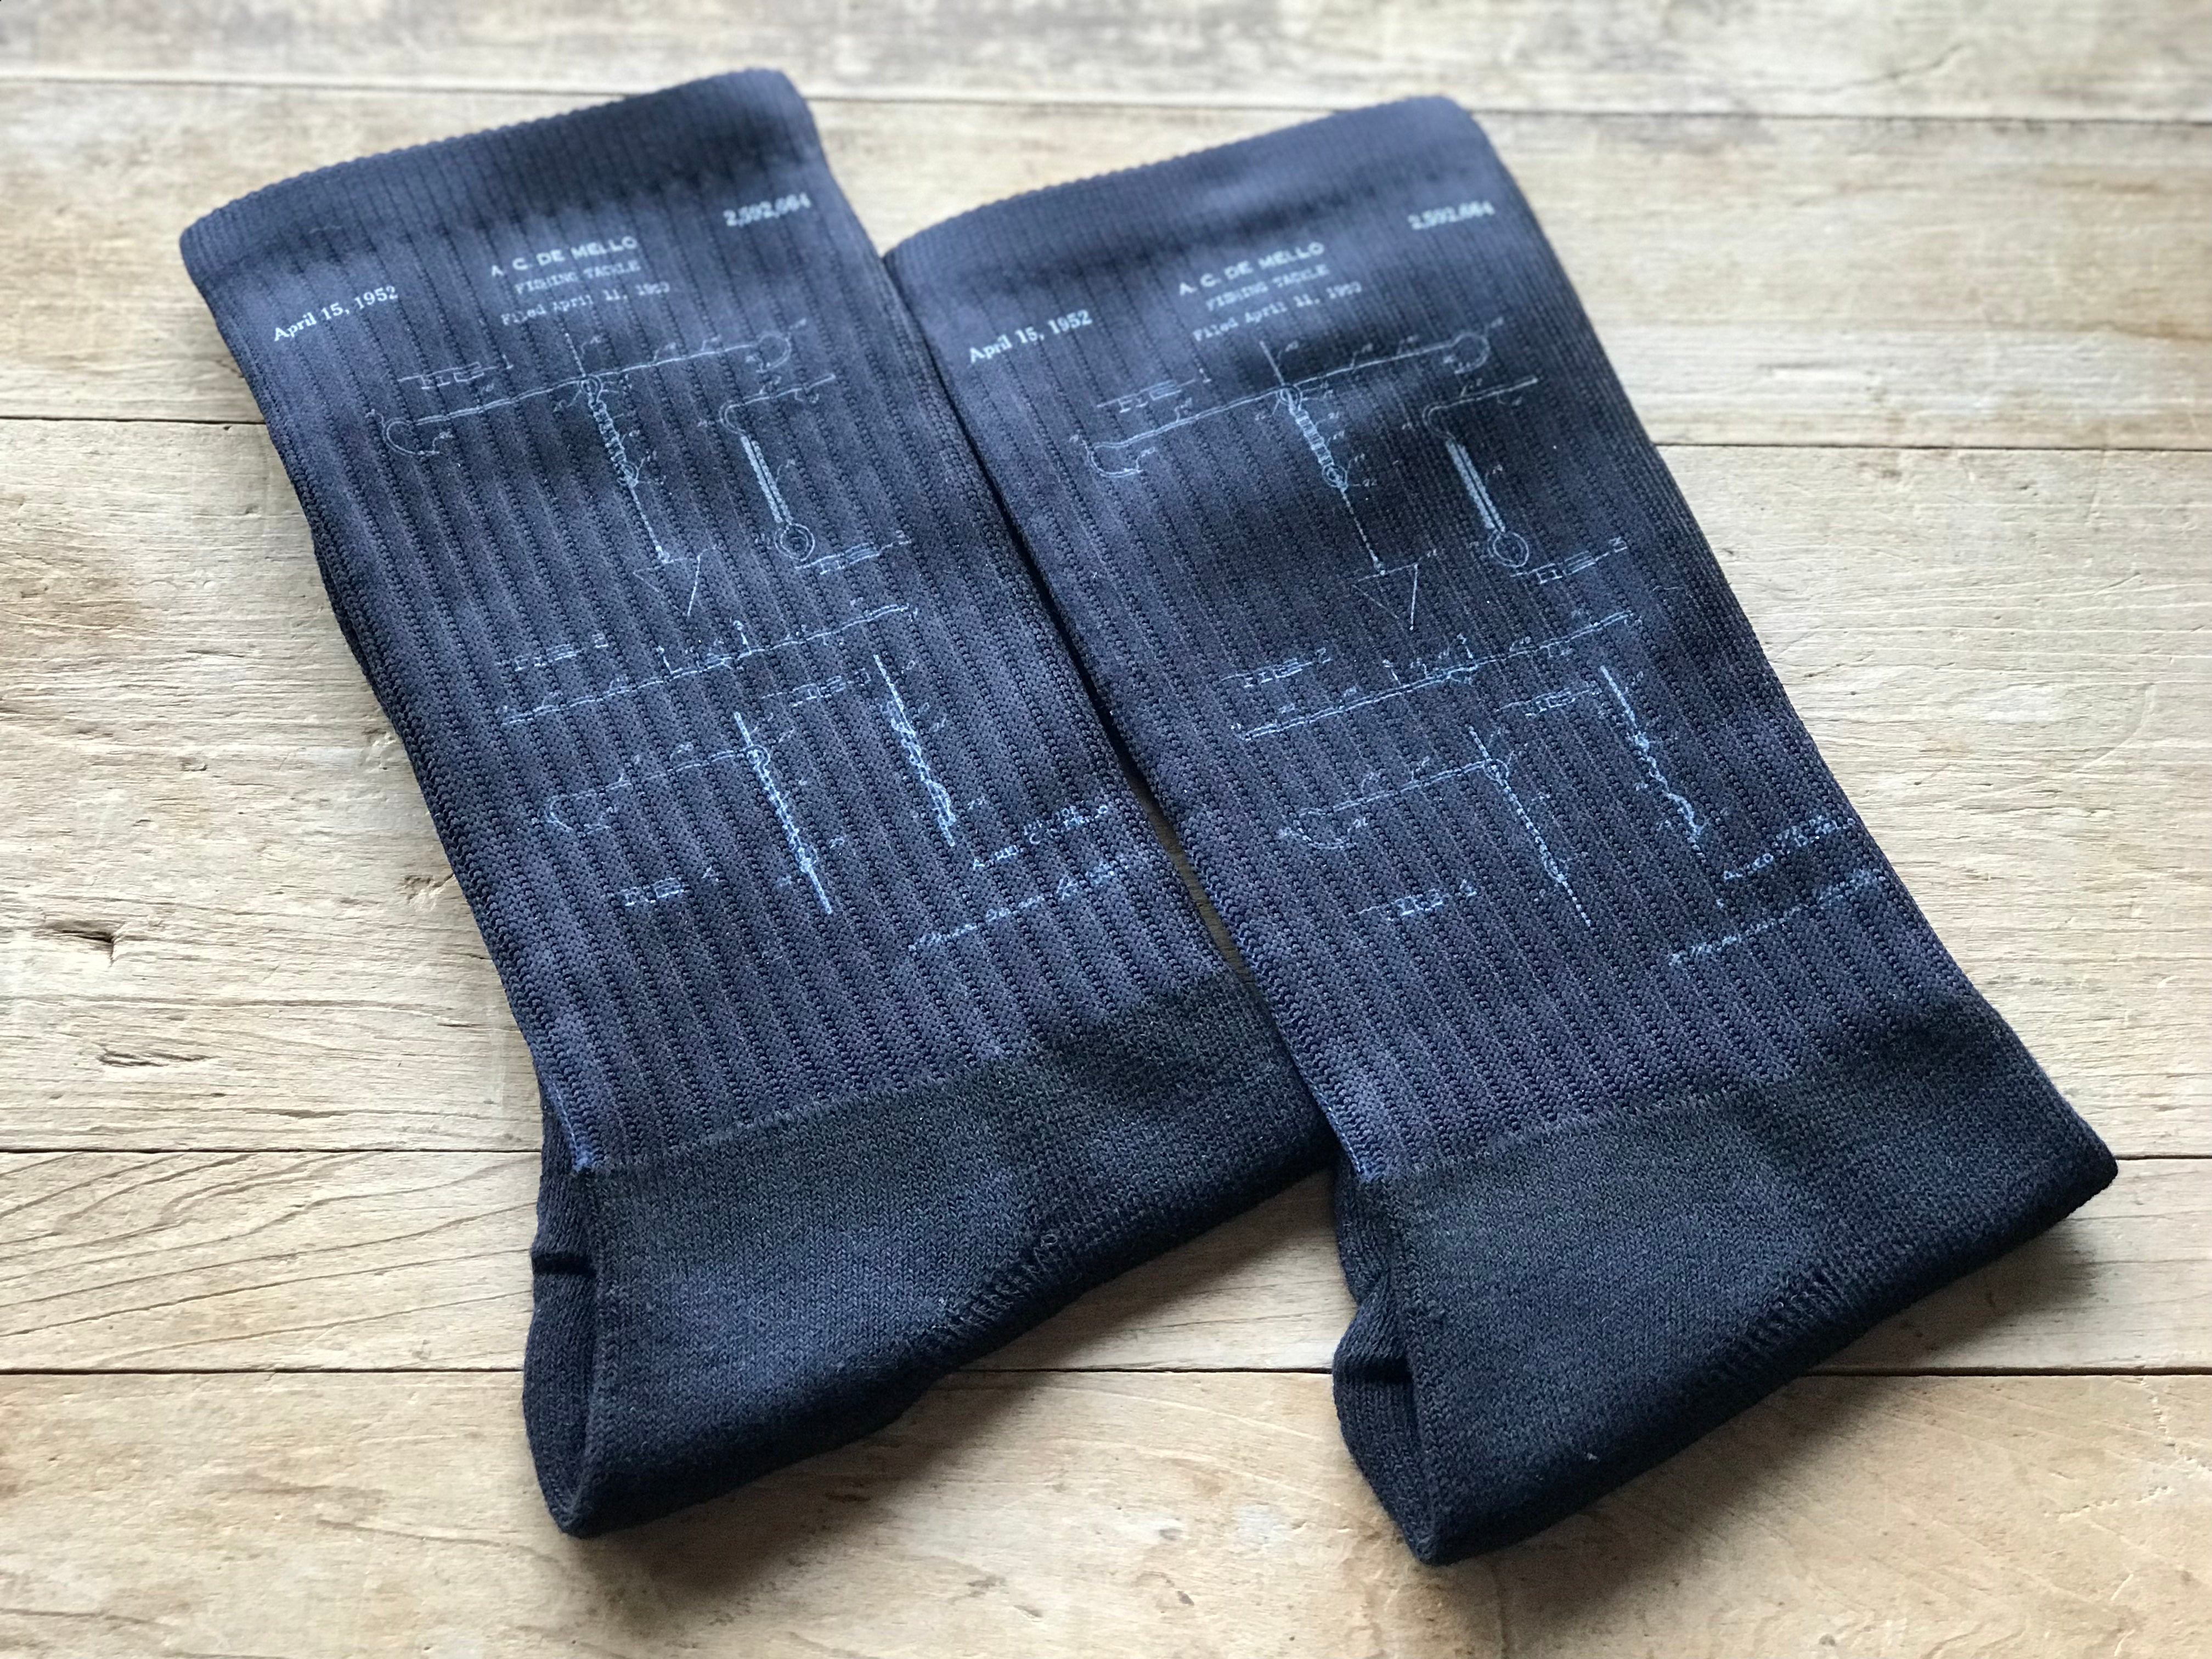 Fishing Tackle Schematic His and Hers Socks